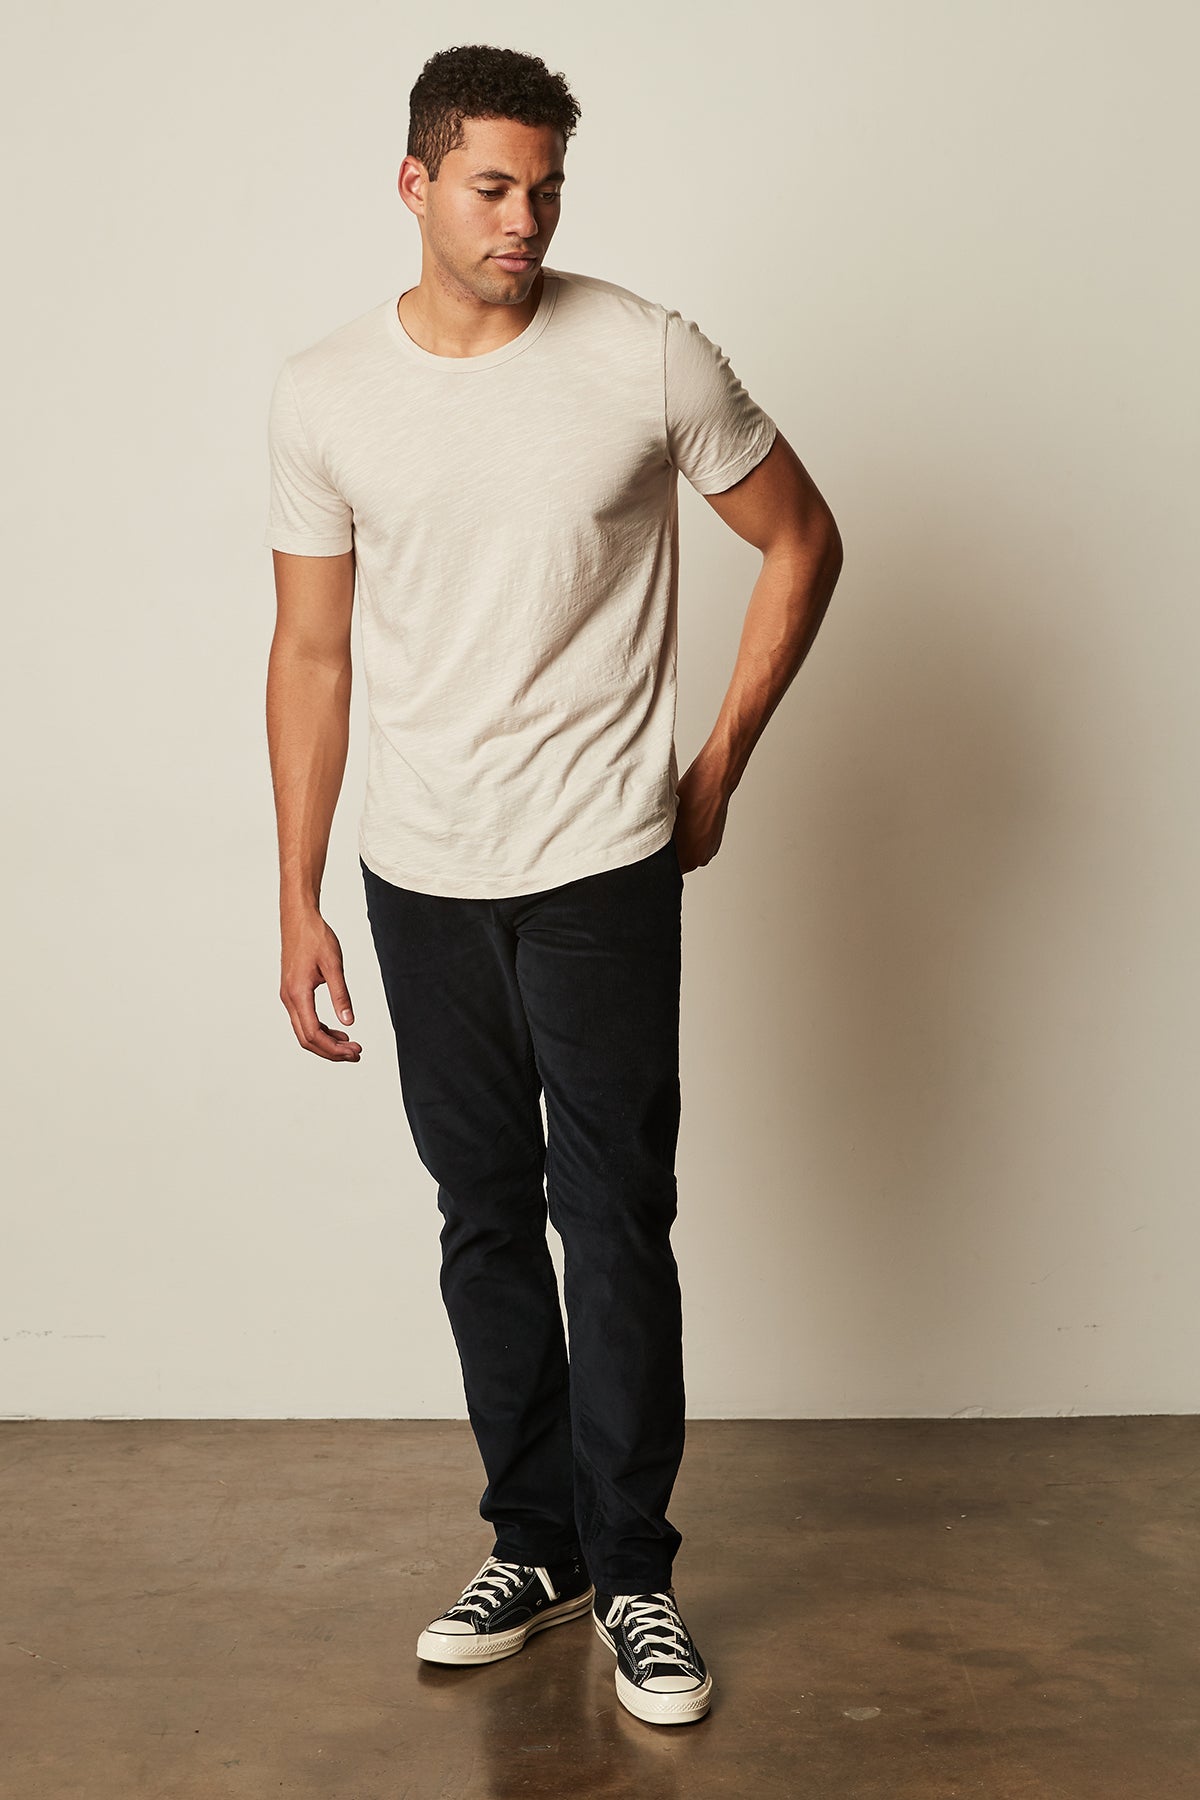   a man wearing a Velvet by Graham & Spencer AMARO CREW NECK SLUB TEE and jeans. 